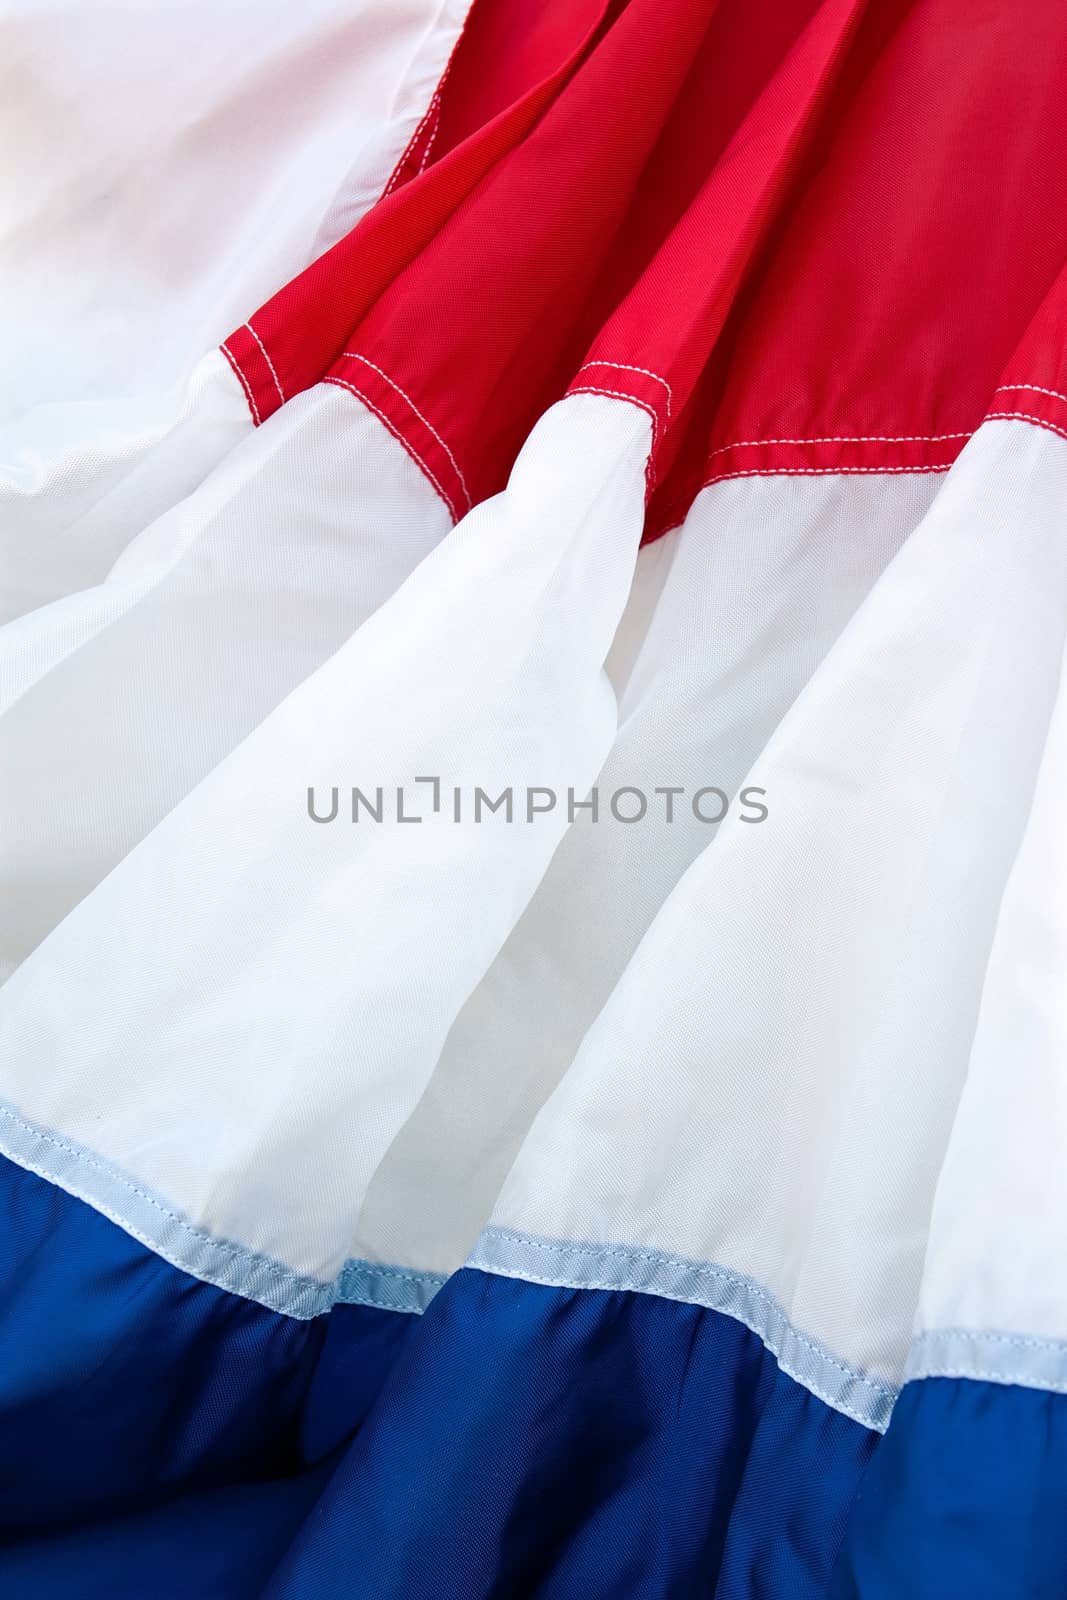 Fabric Of Red, White, And Blue Banner Fills Frame Vertically by BluIz60